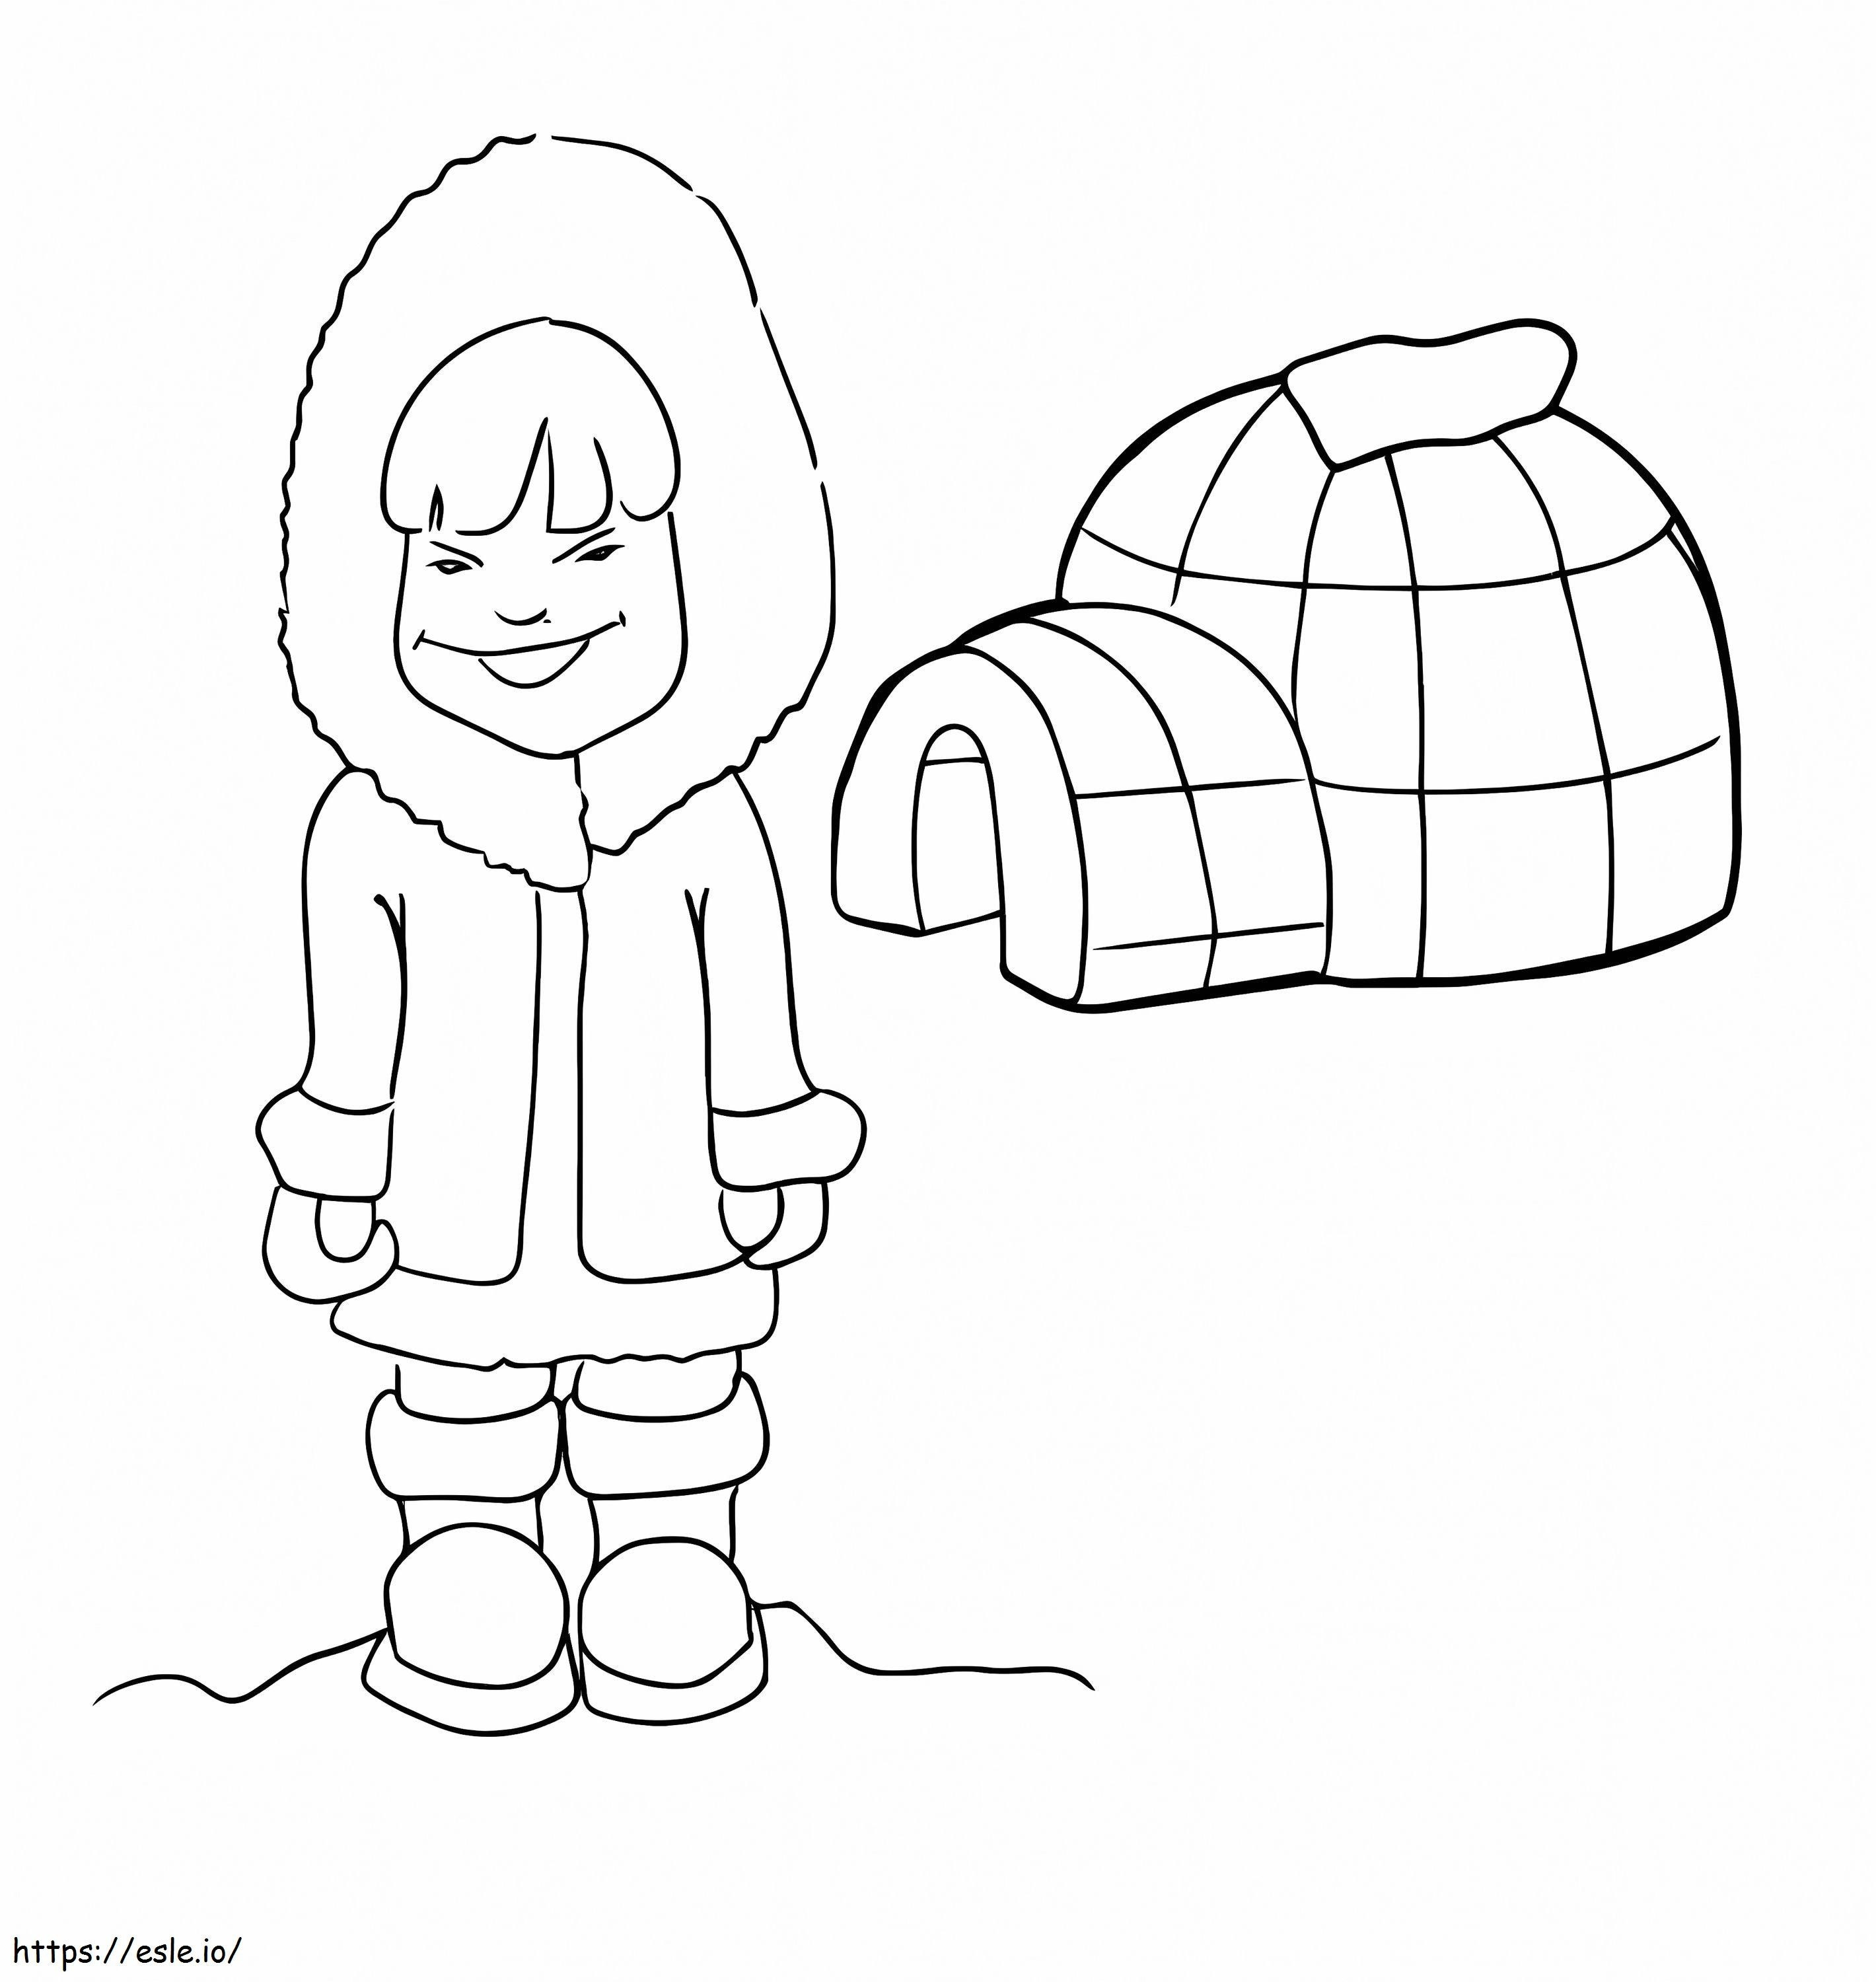 Free Igloo For Kid coloring page